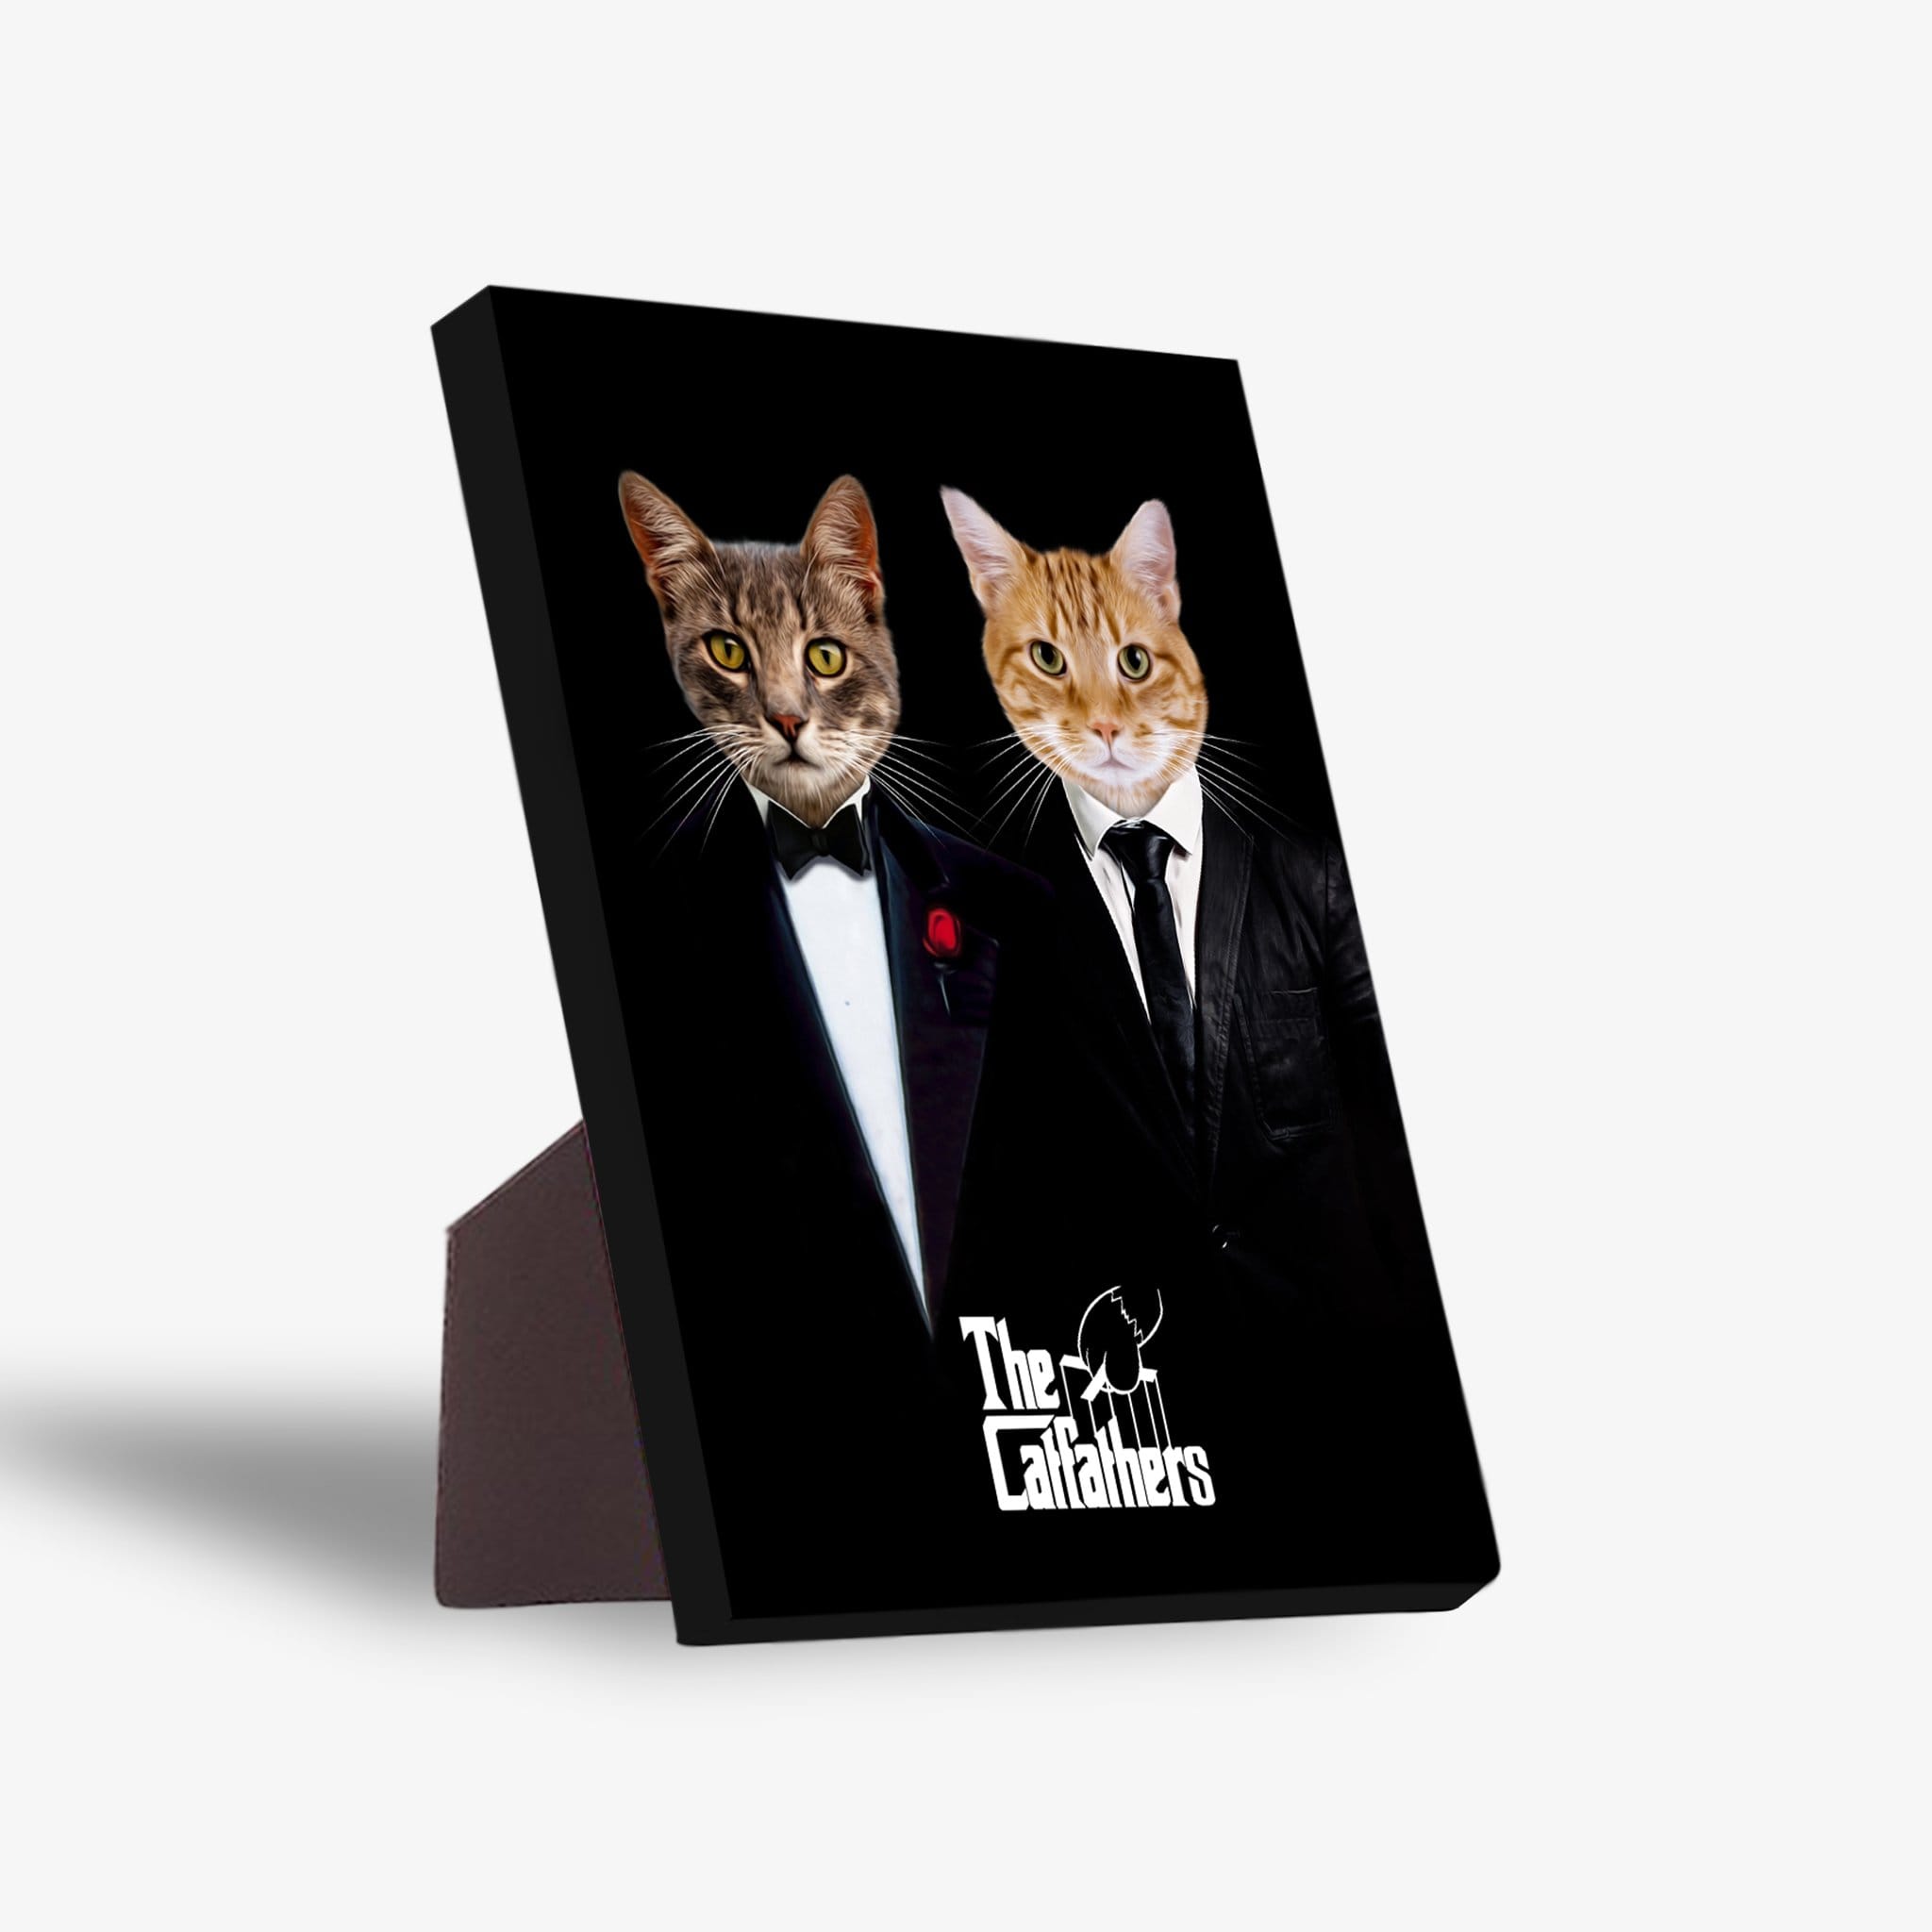 &#39;The Catfathers&#39; Personalized 2 Pet Standing Canvas